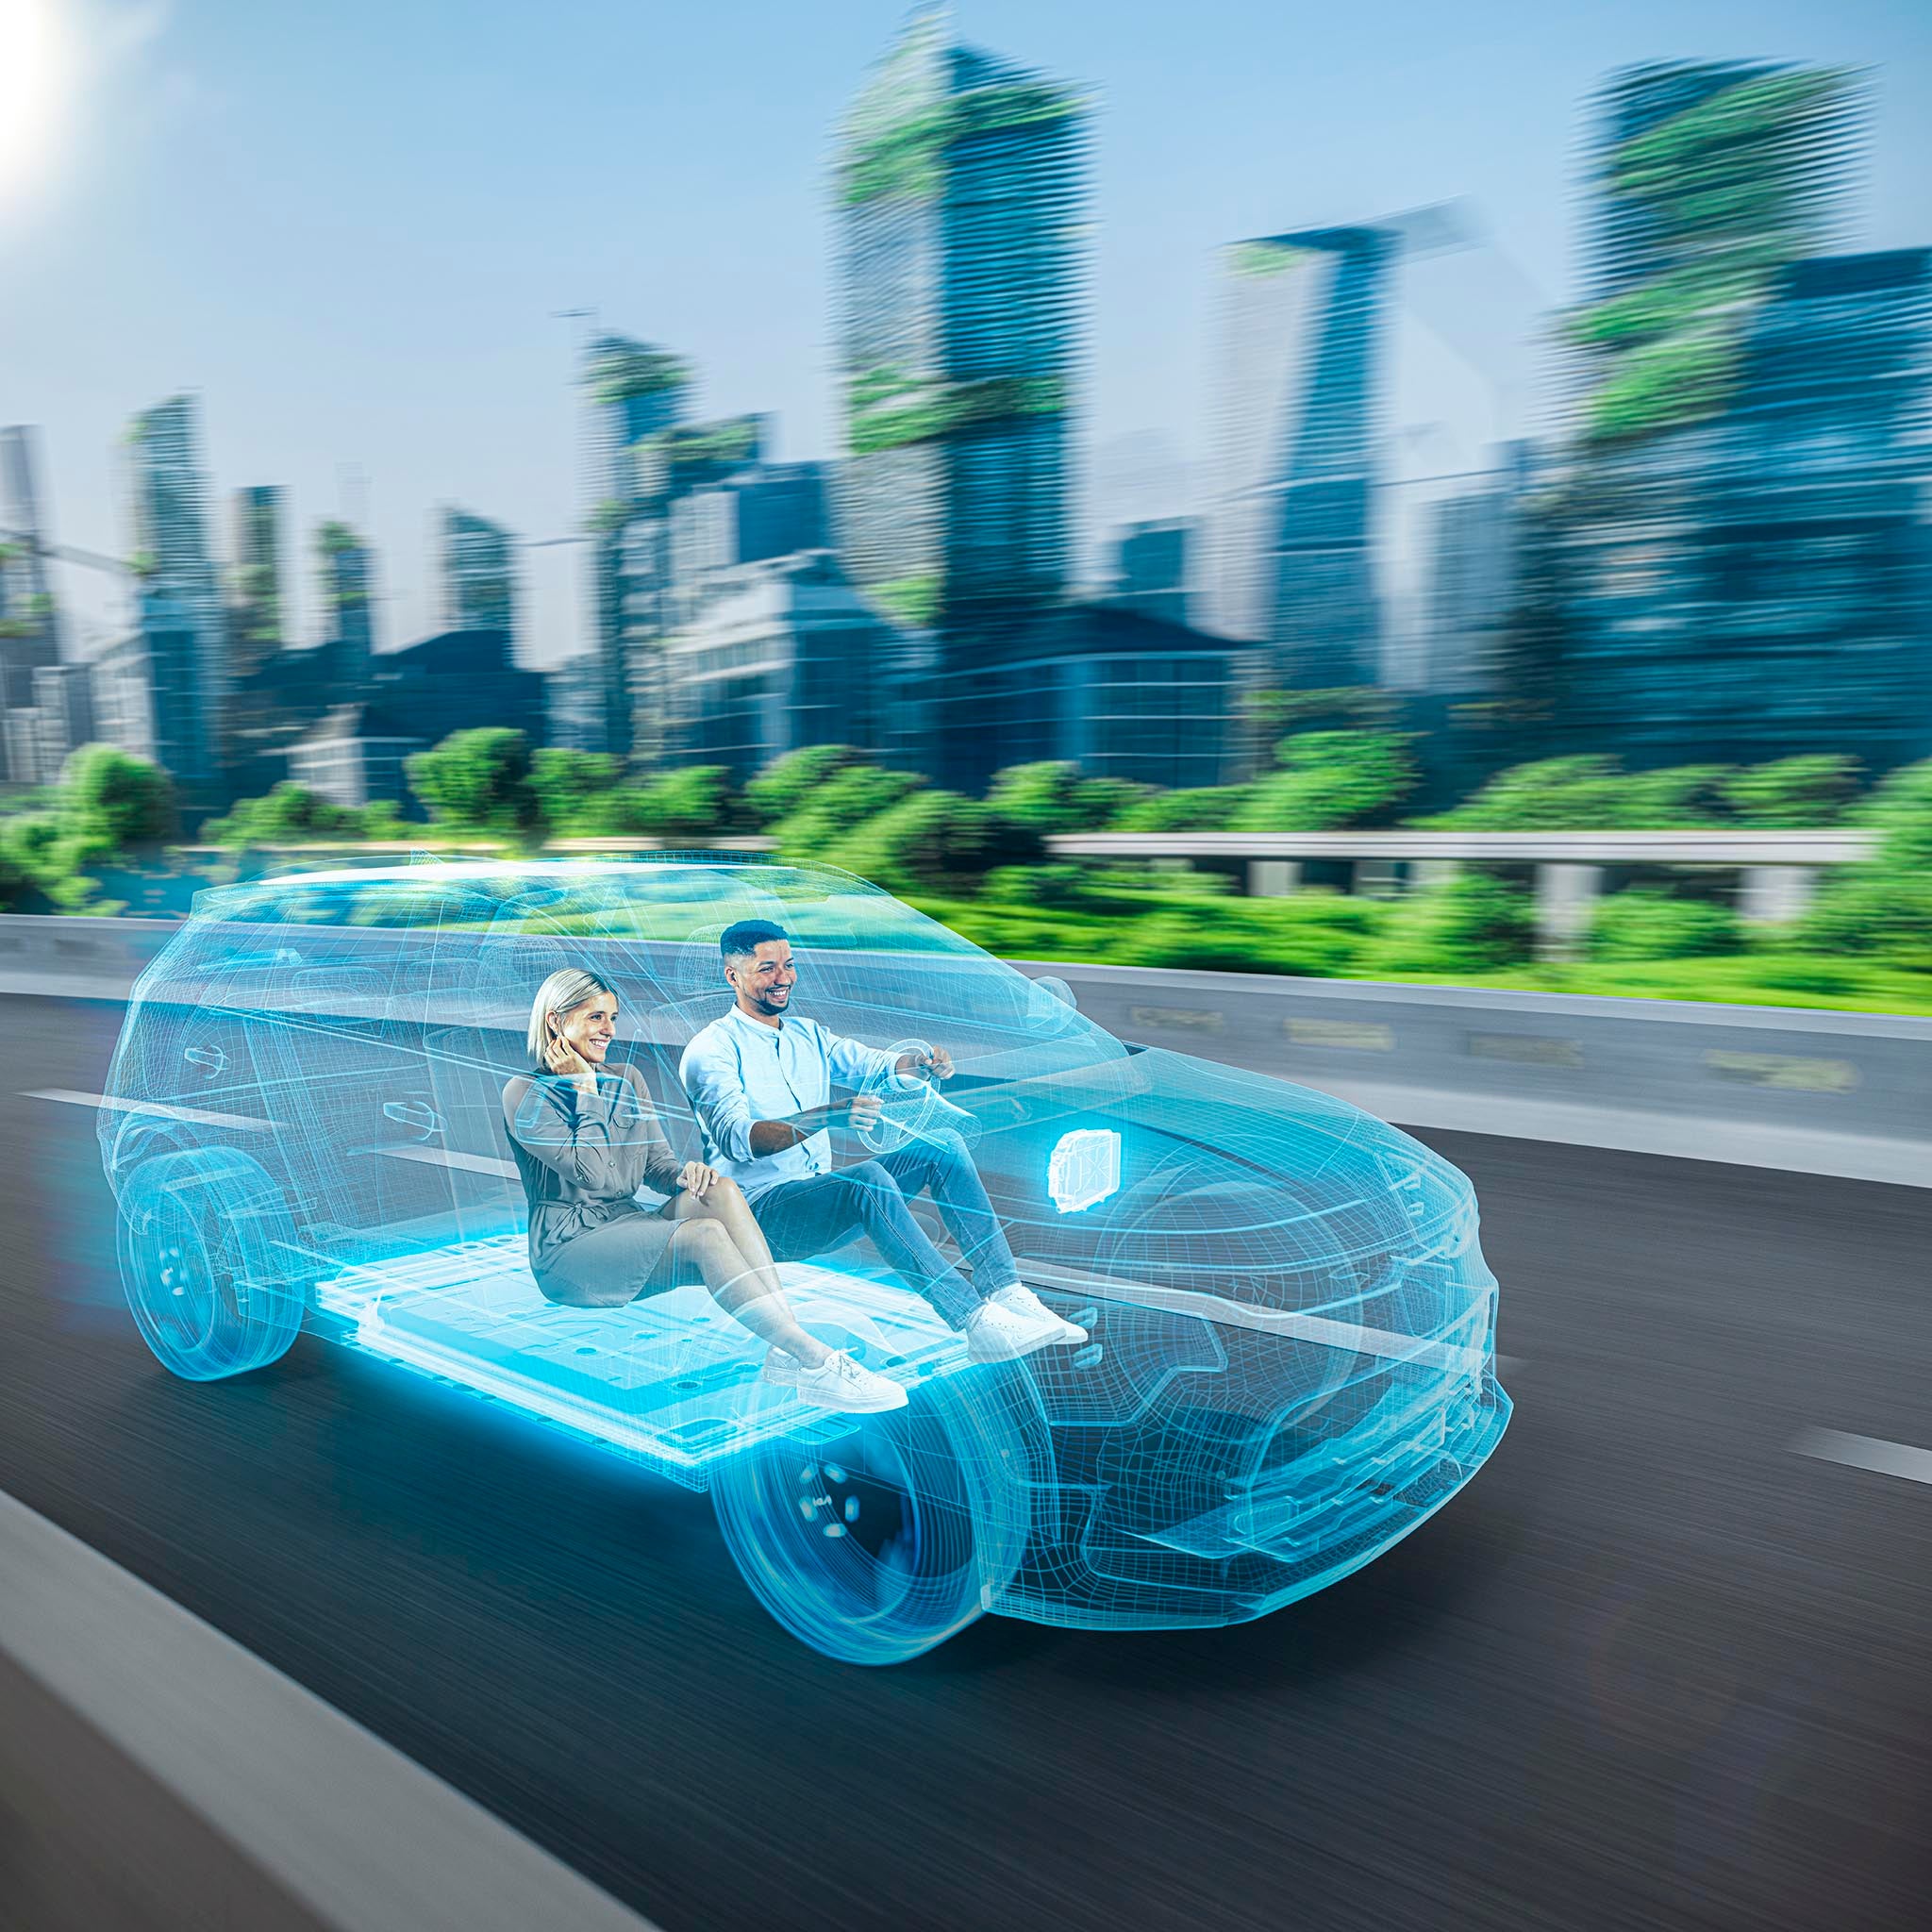 Electrifying the mobility of tomorrow